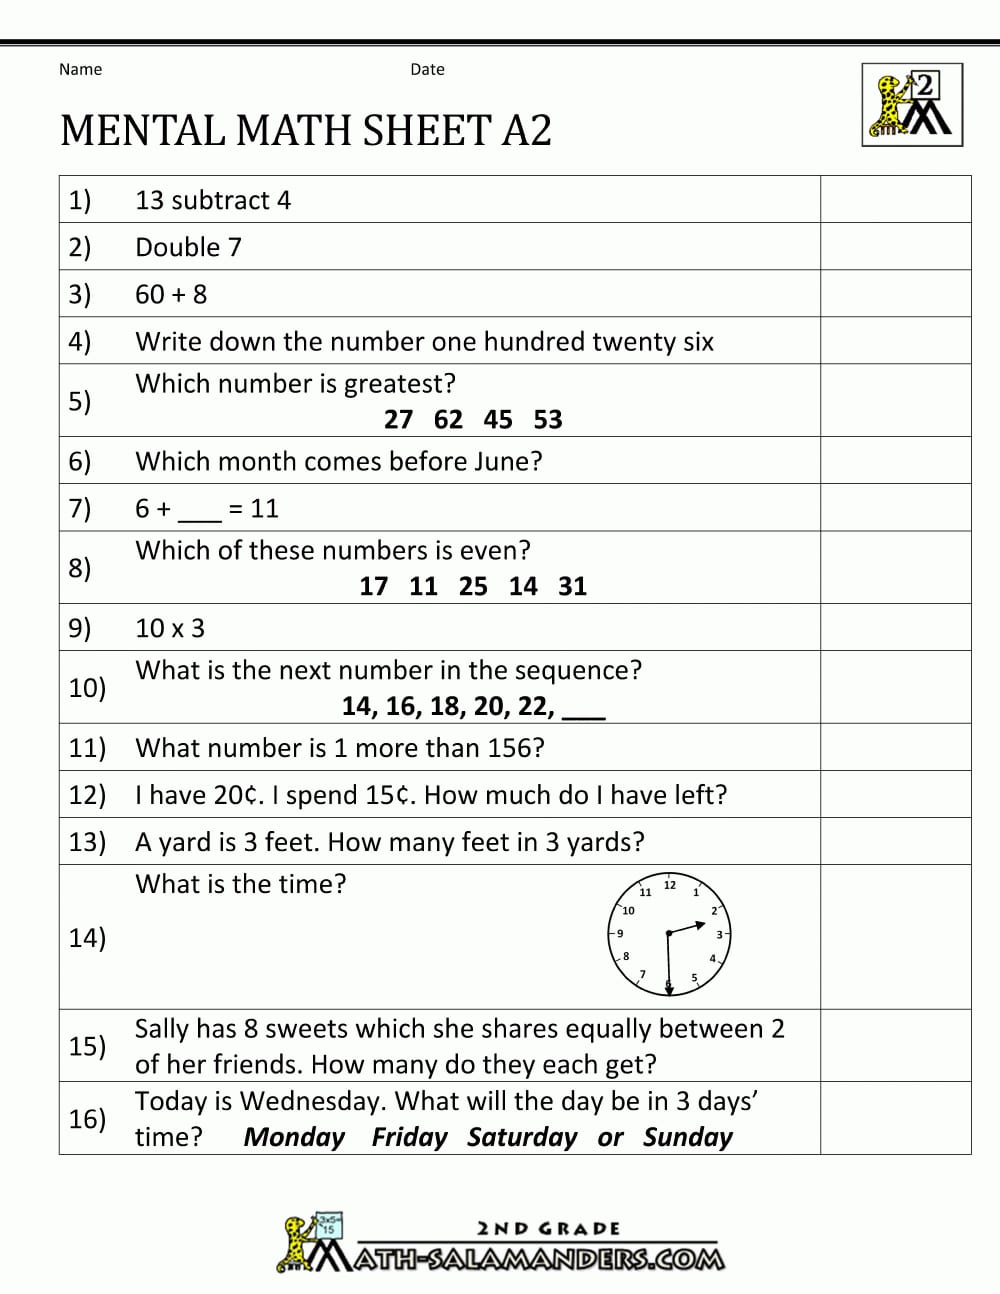 Class 2 Mental Math Worksheet With Answers Pdf